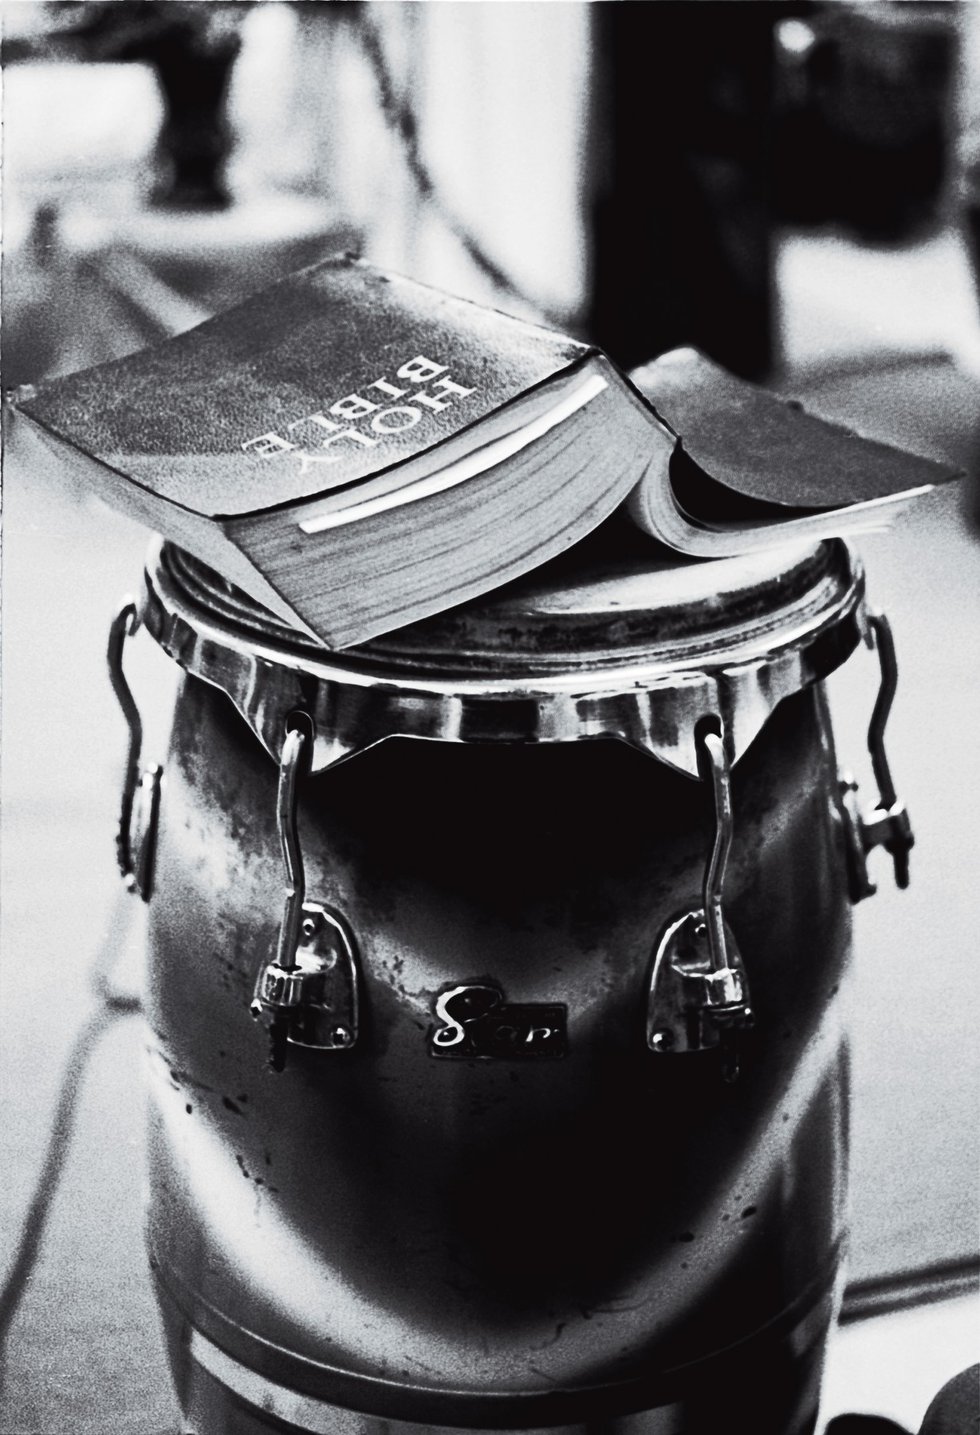 Chester Higgins Jr., 
Bible and Drum, 1989
Digital silver gelatin print
Collection of the artist